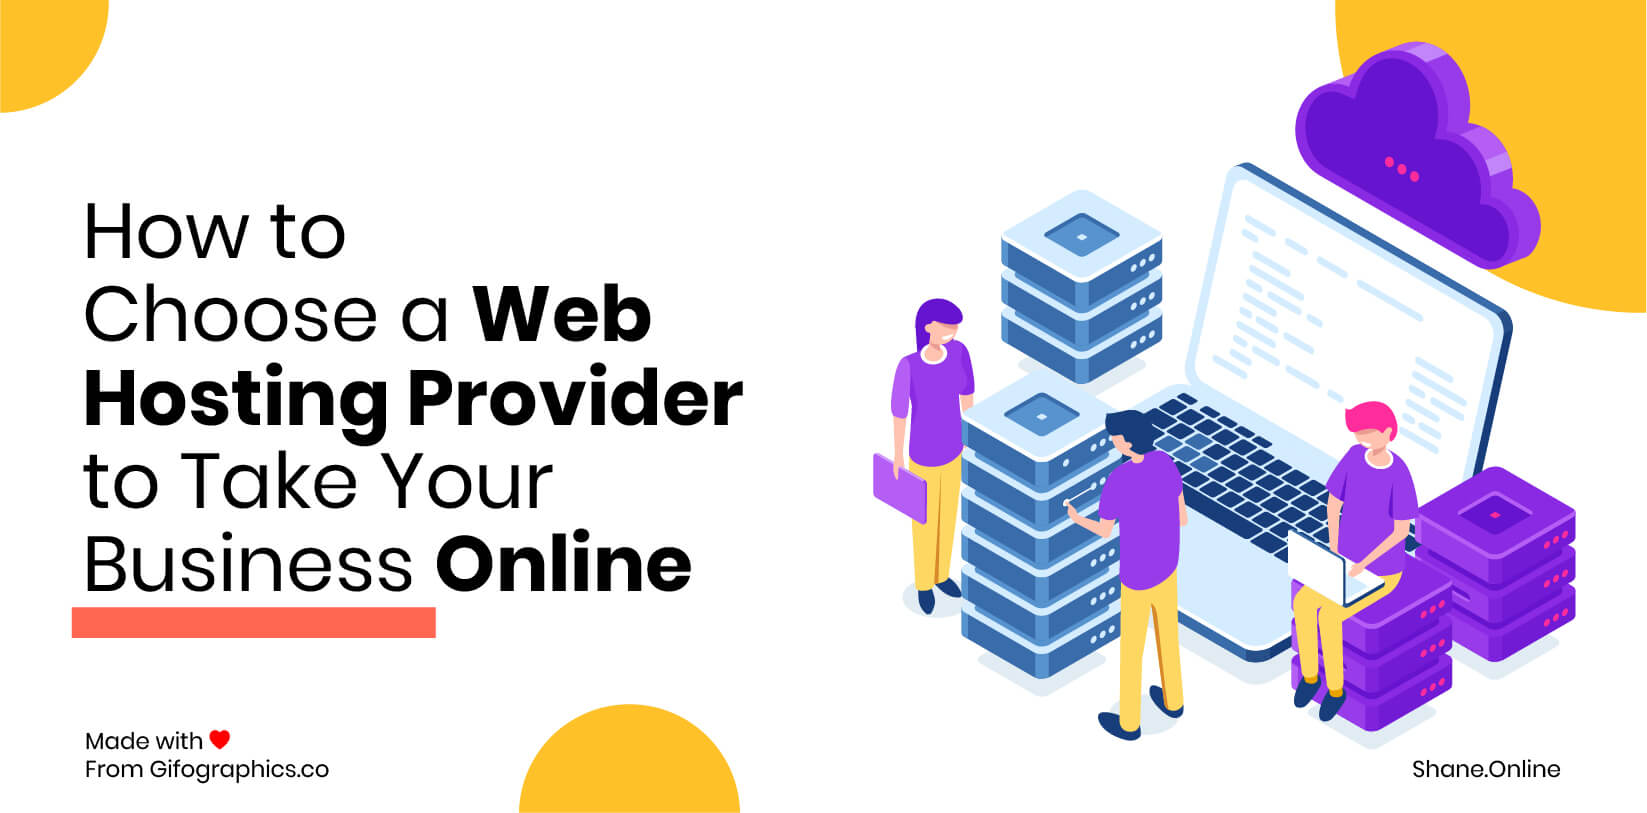 How to Choose a Web Hosting Provider to Take Your Business Online